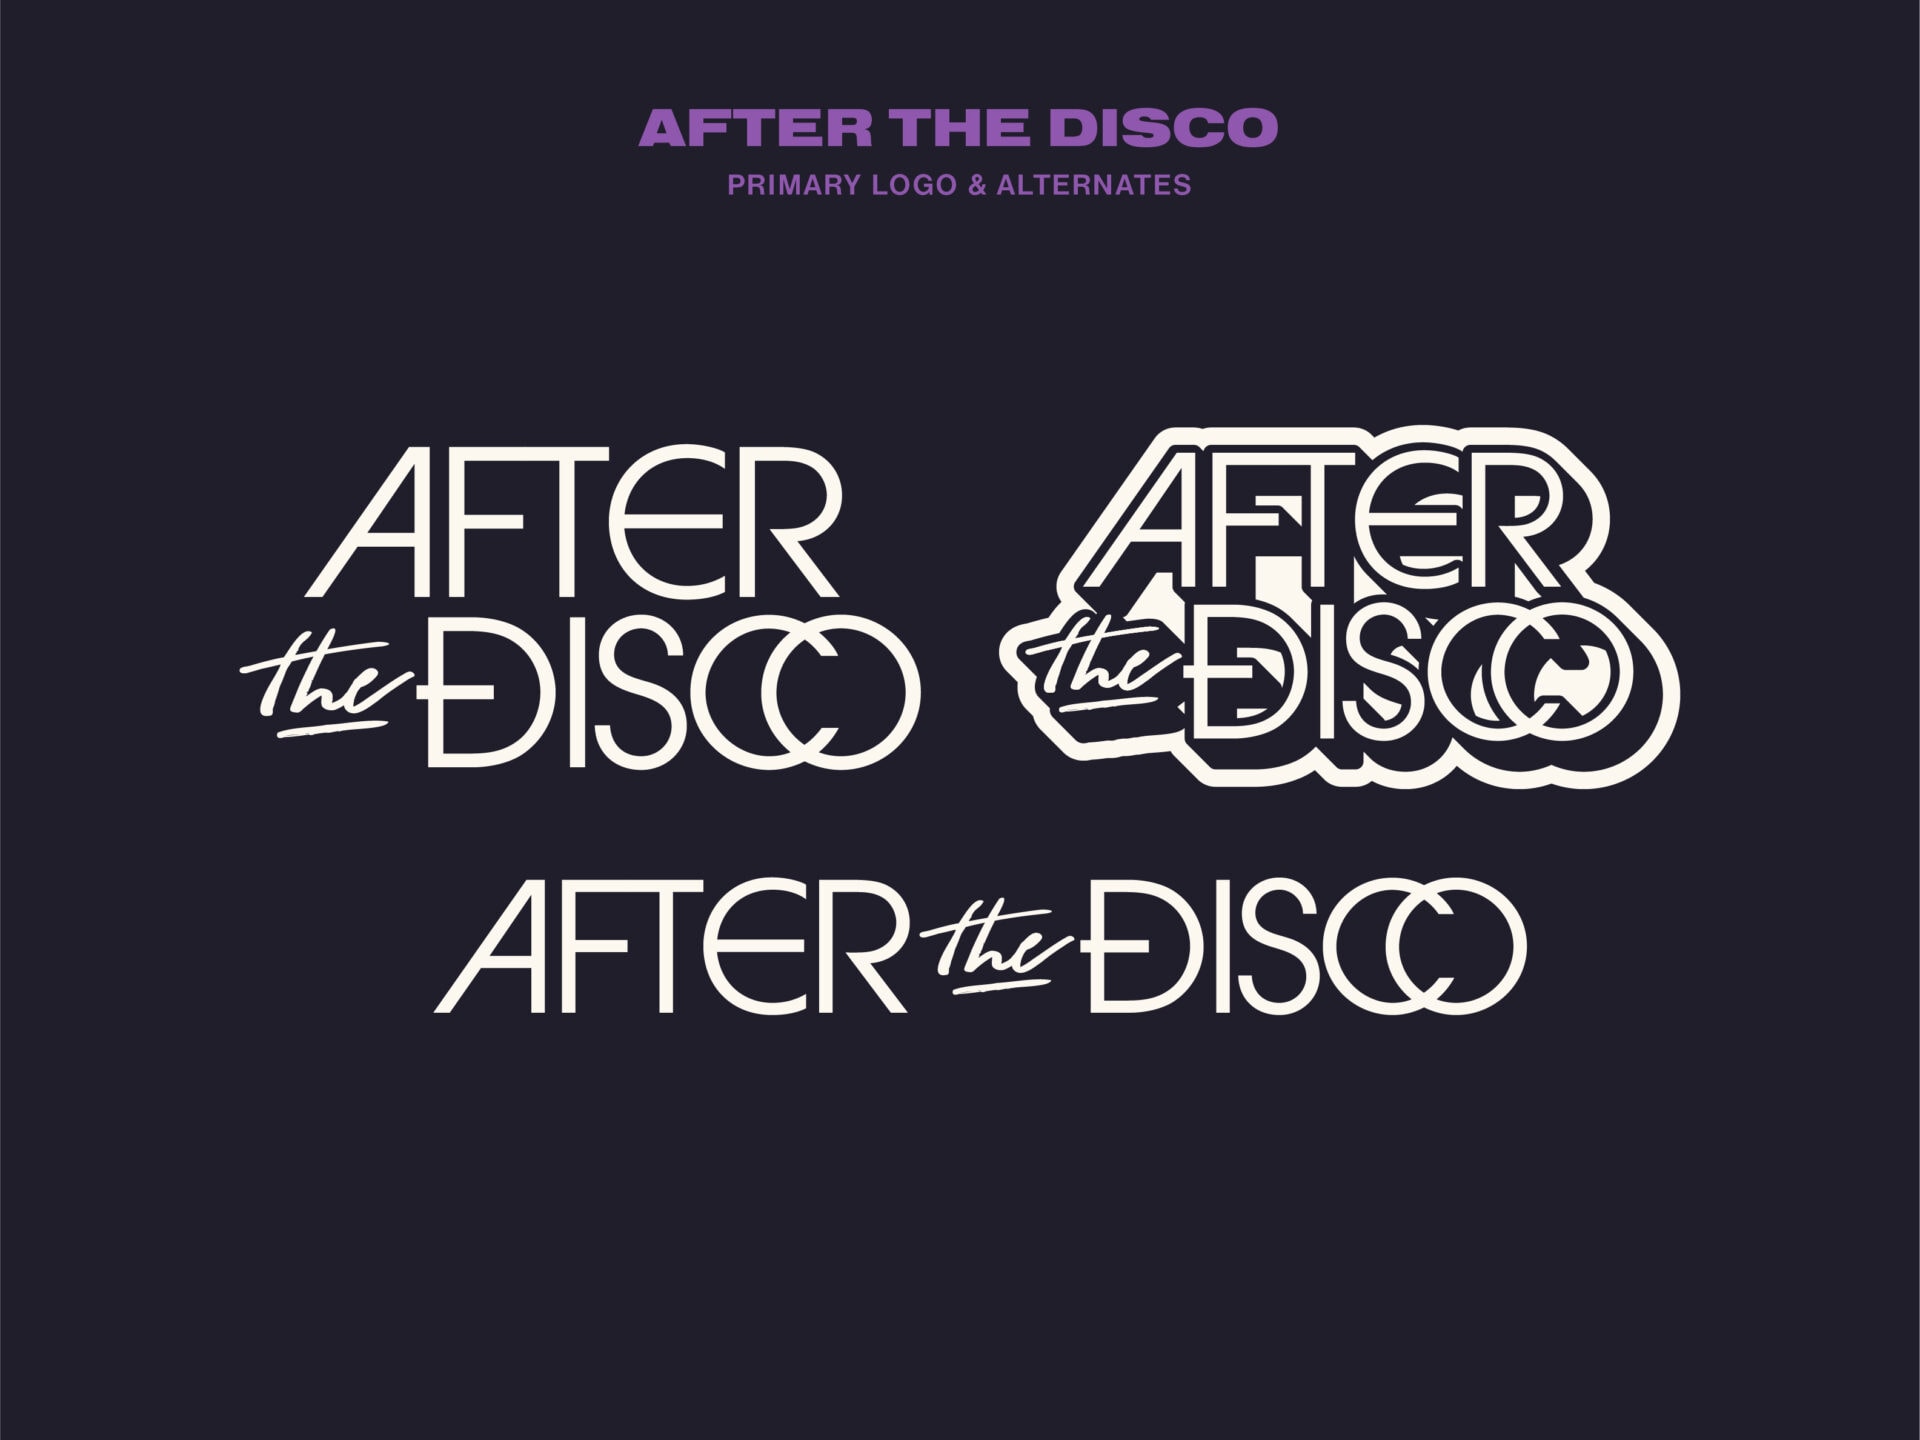 After the Disco logos